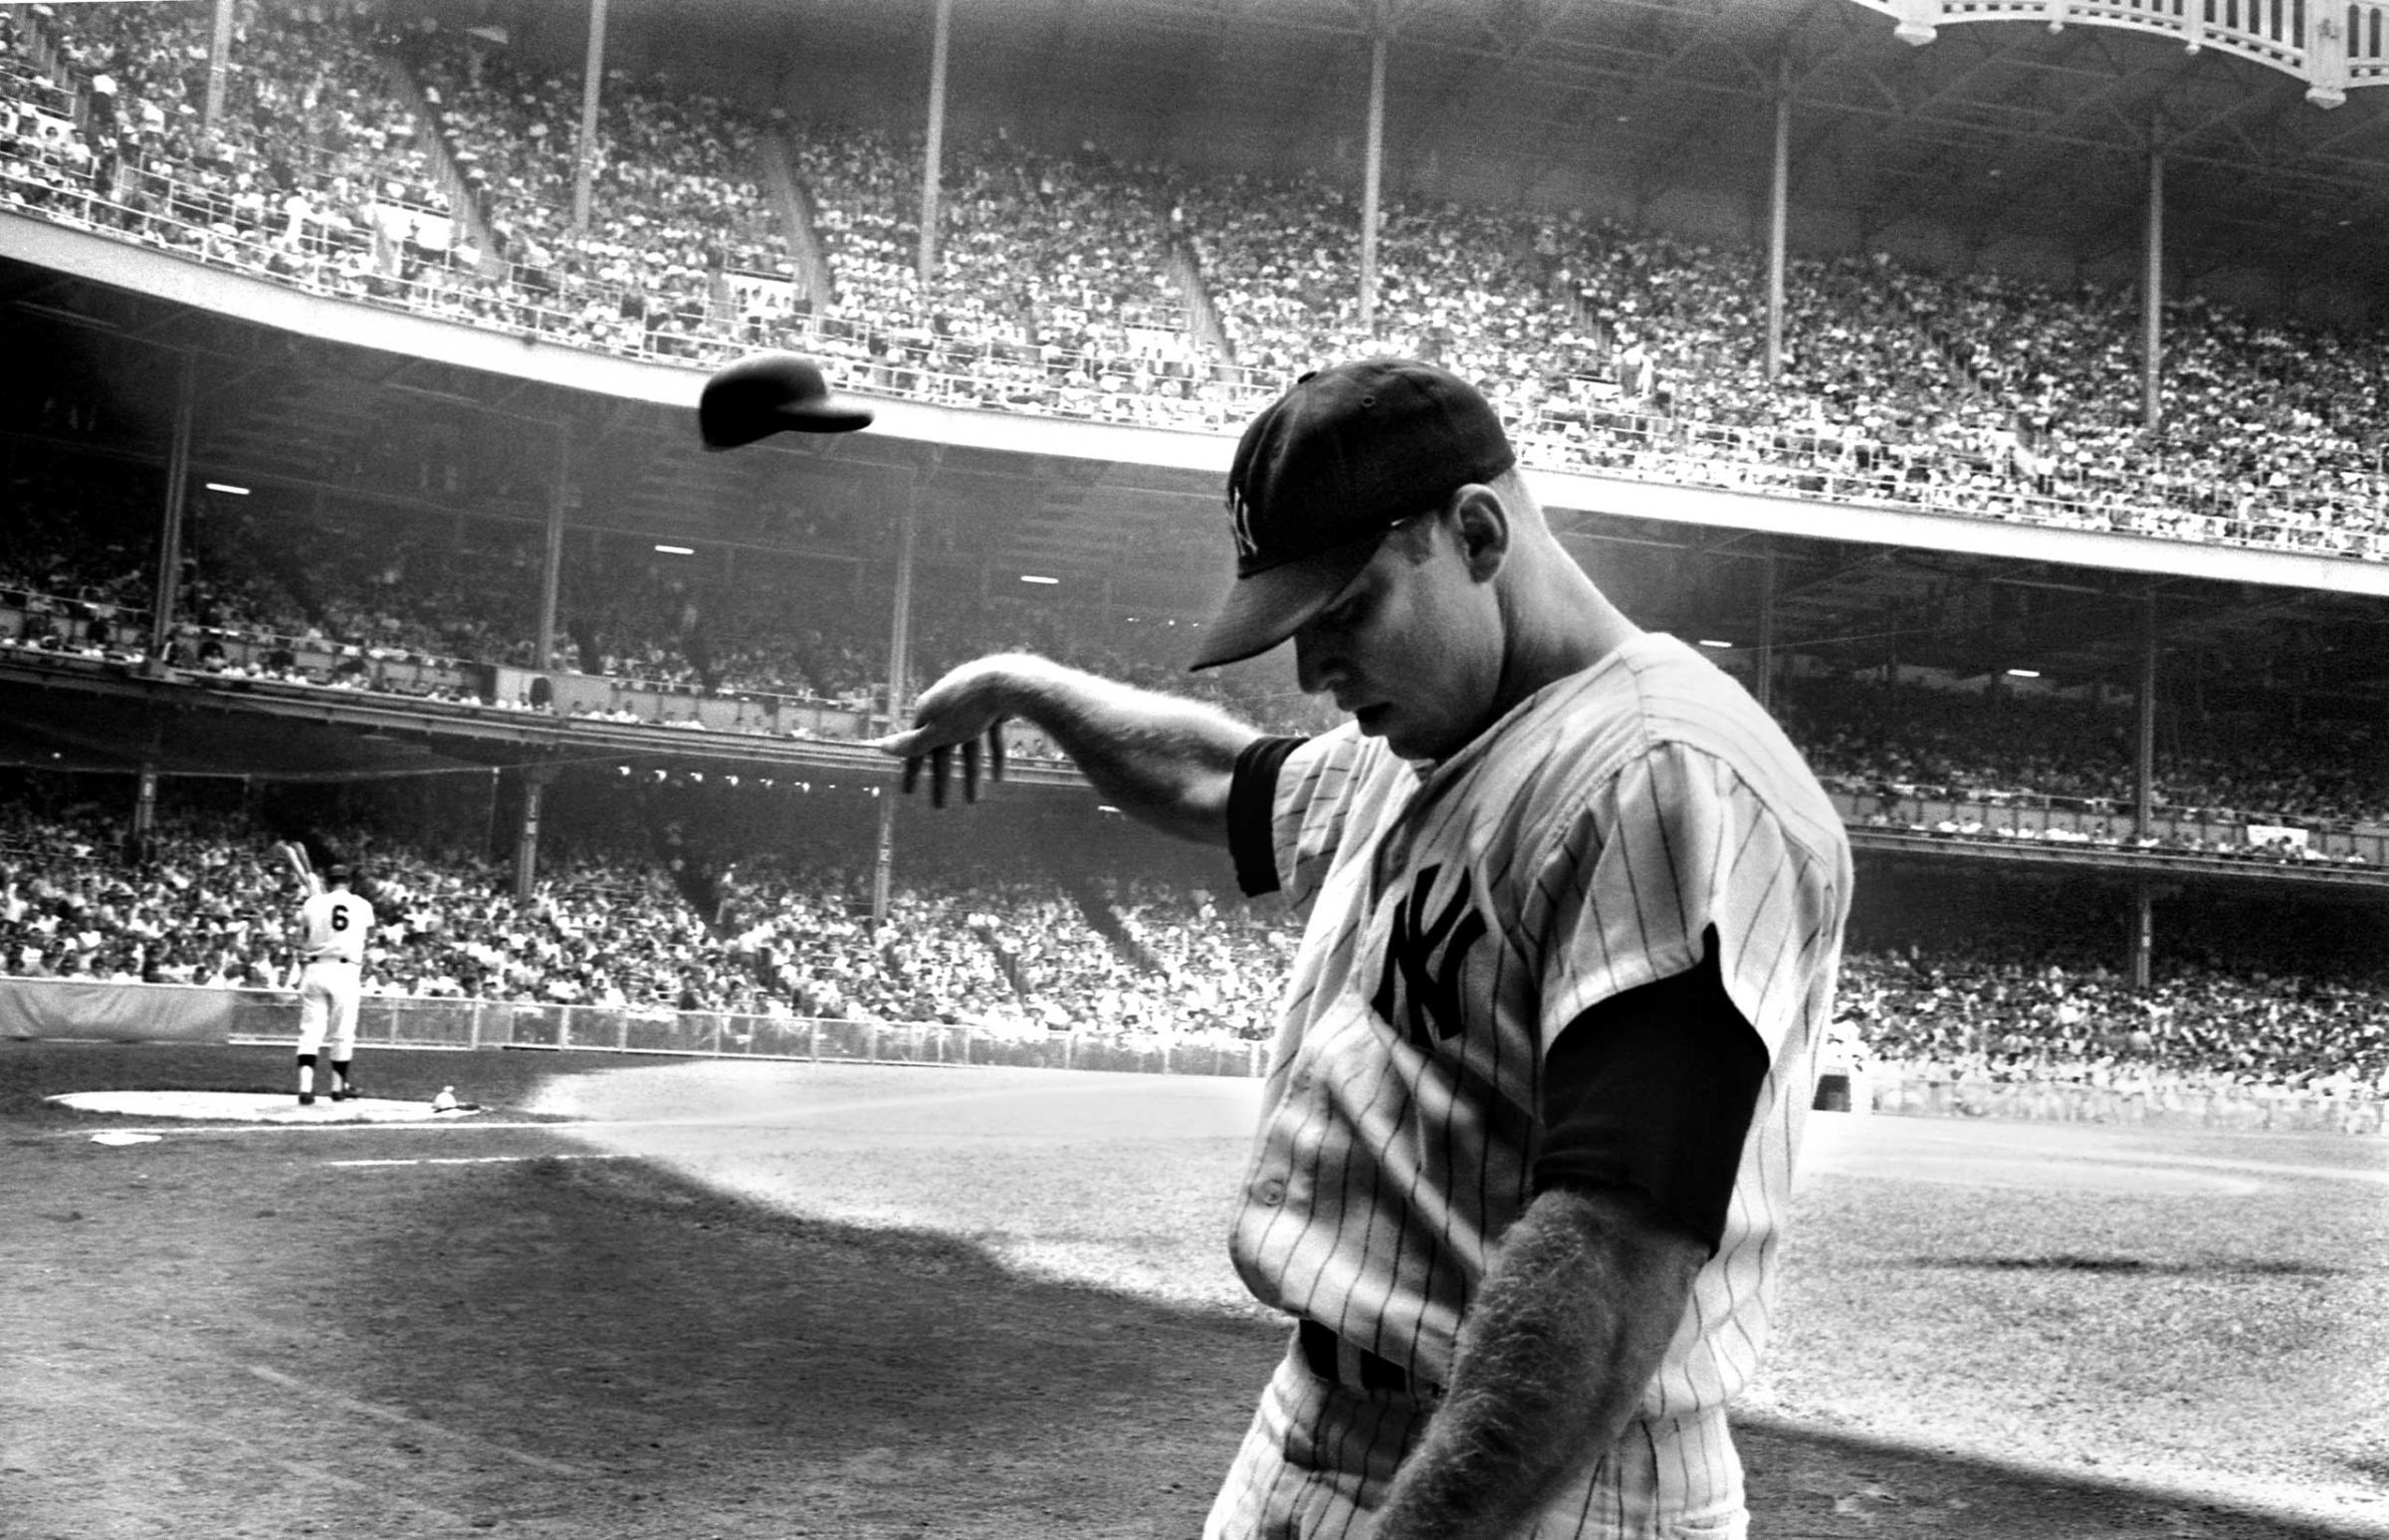 Mickey Mantle tosses his helmet in disgust after a terrible at-bat, New York, 1965.